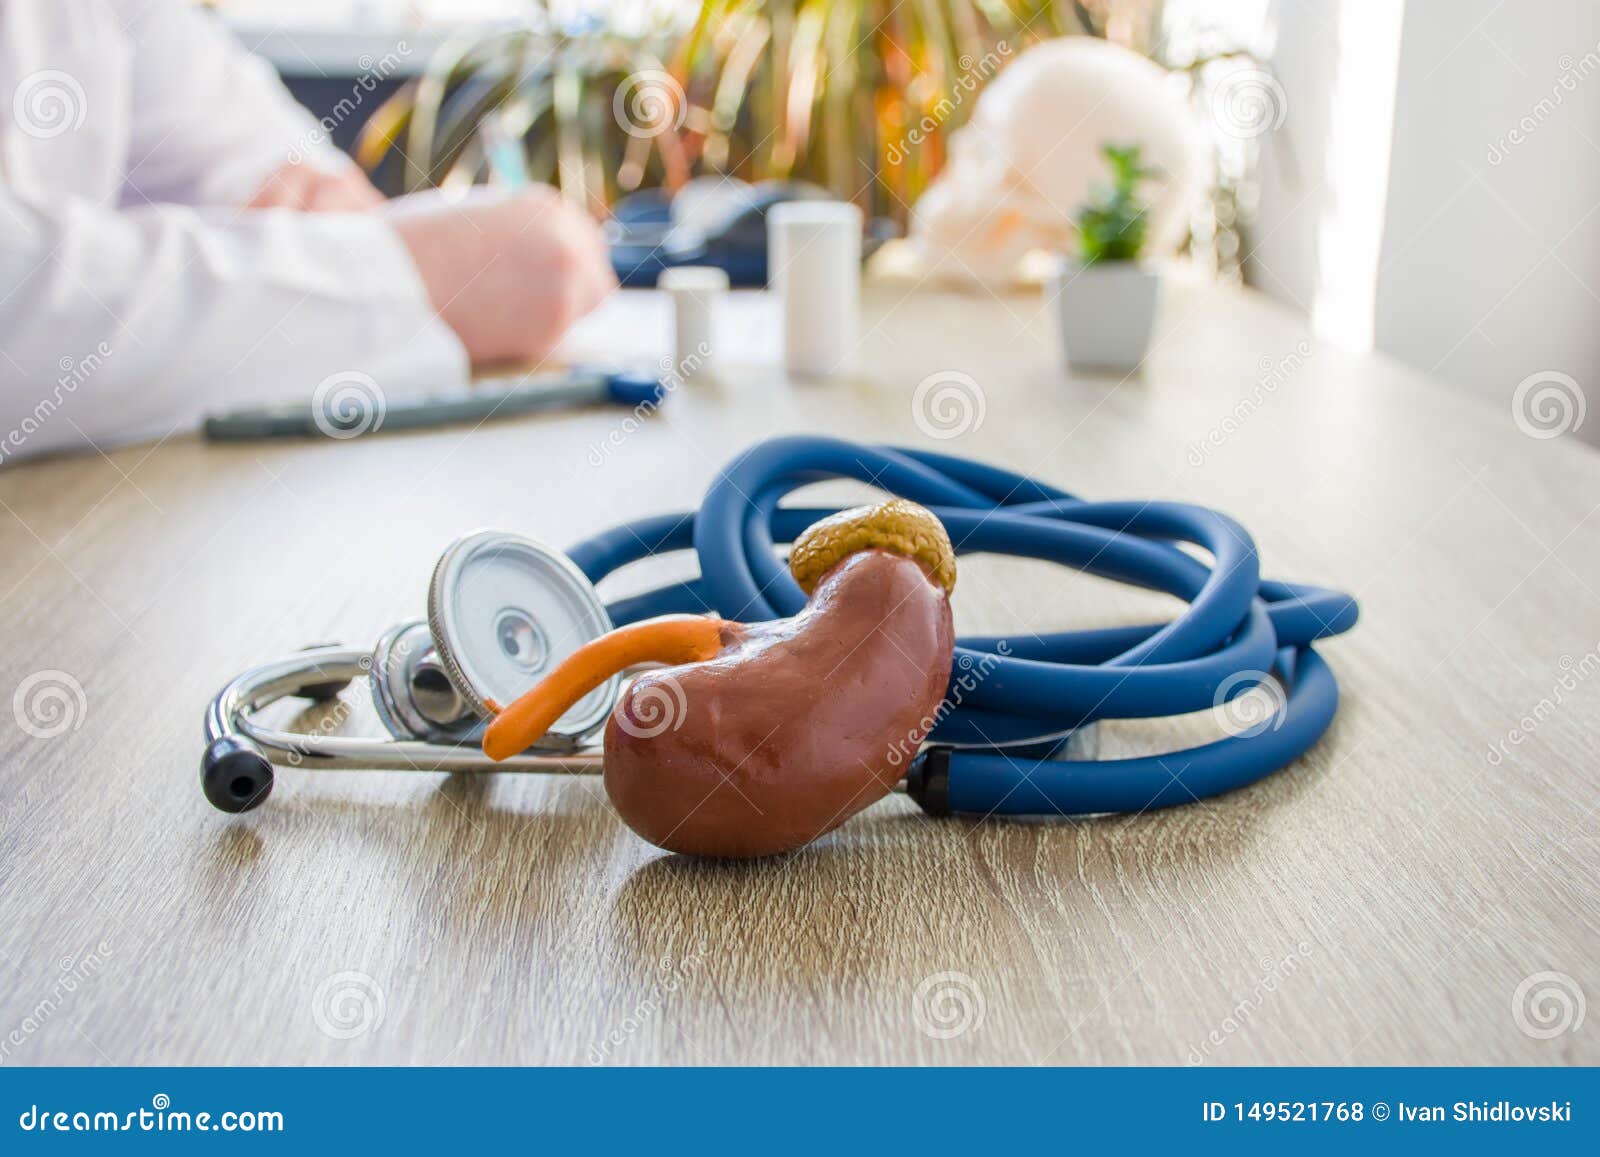 concept photo of diagnosis and treatment of kidneys. in foreground is model of kidney near stethoscope on table in background blur